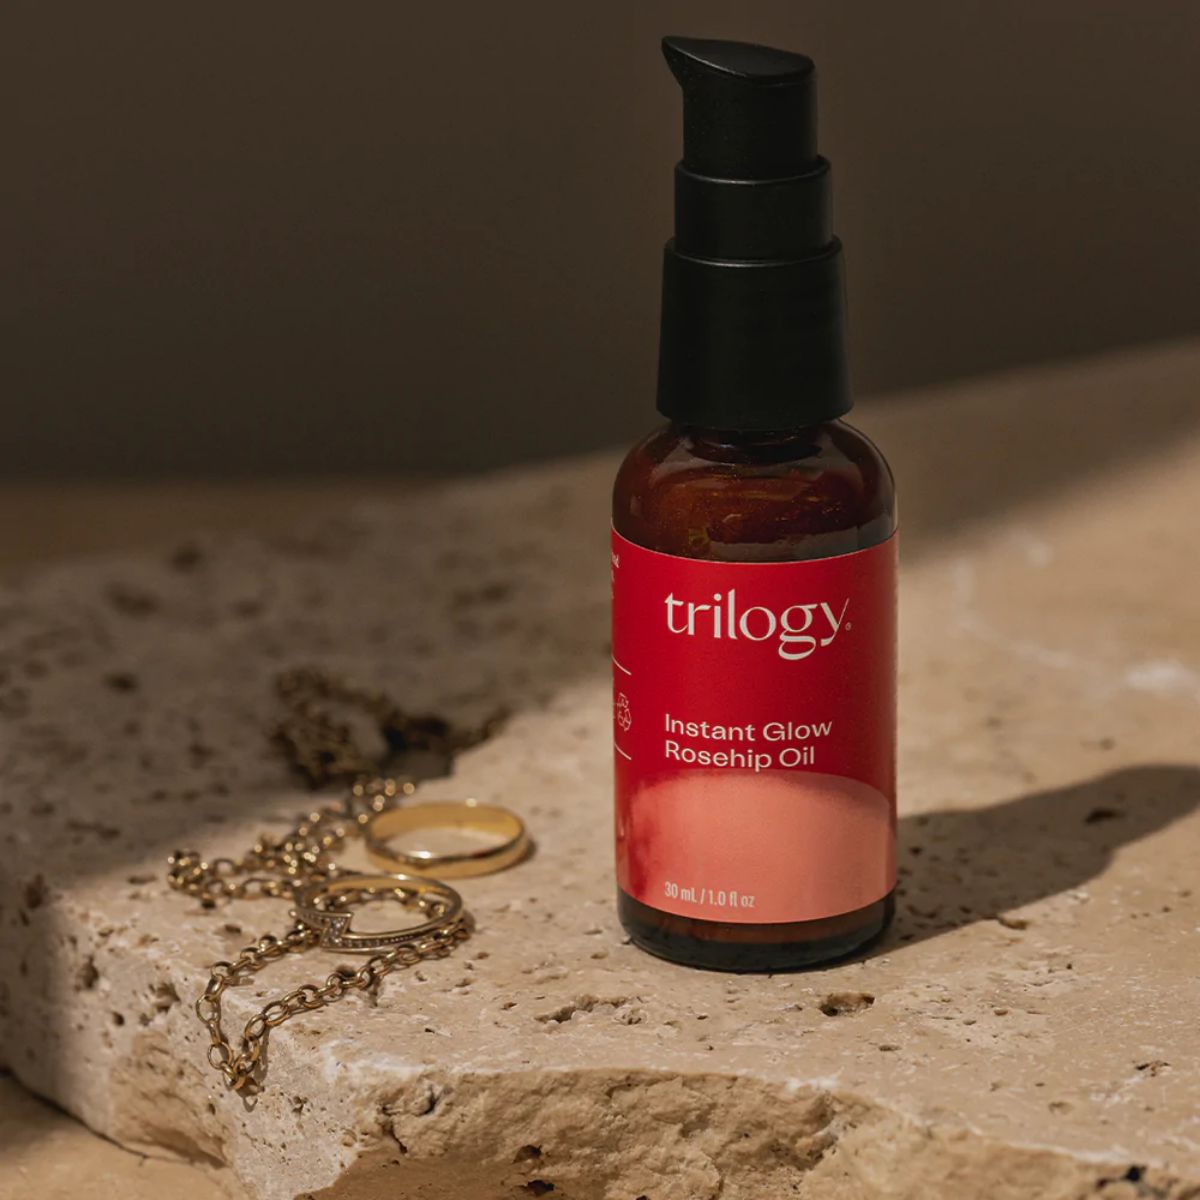 Trilogy Instant Glow Rosehip Oil 30ml – lifestyle image